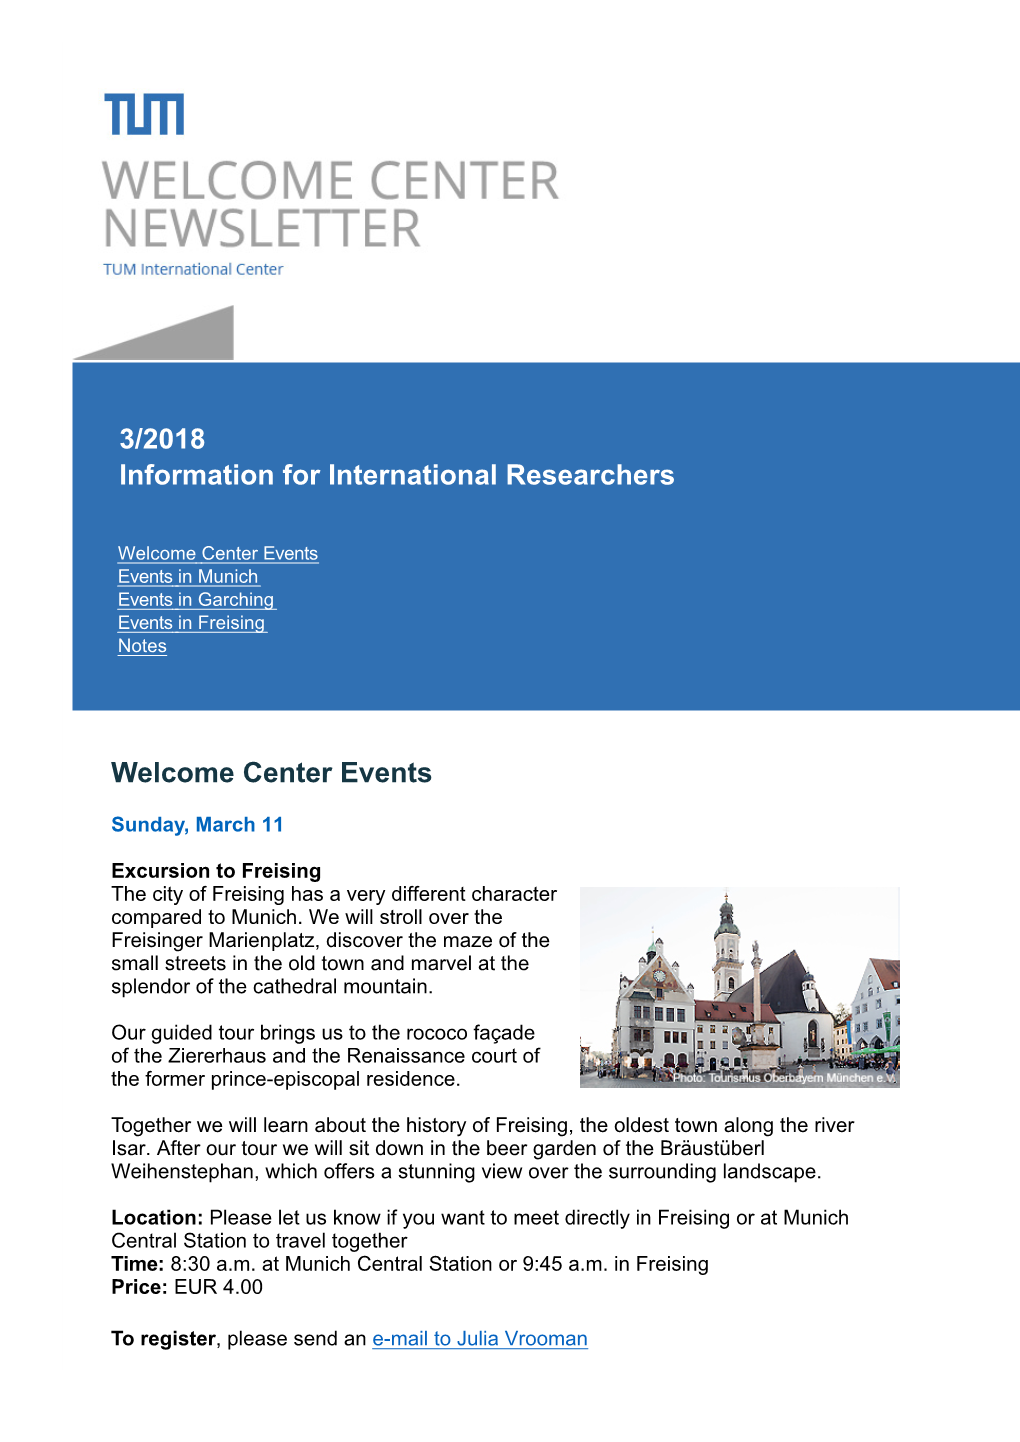 3/2018 Information for International Researchers